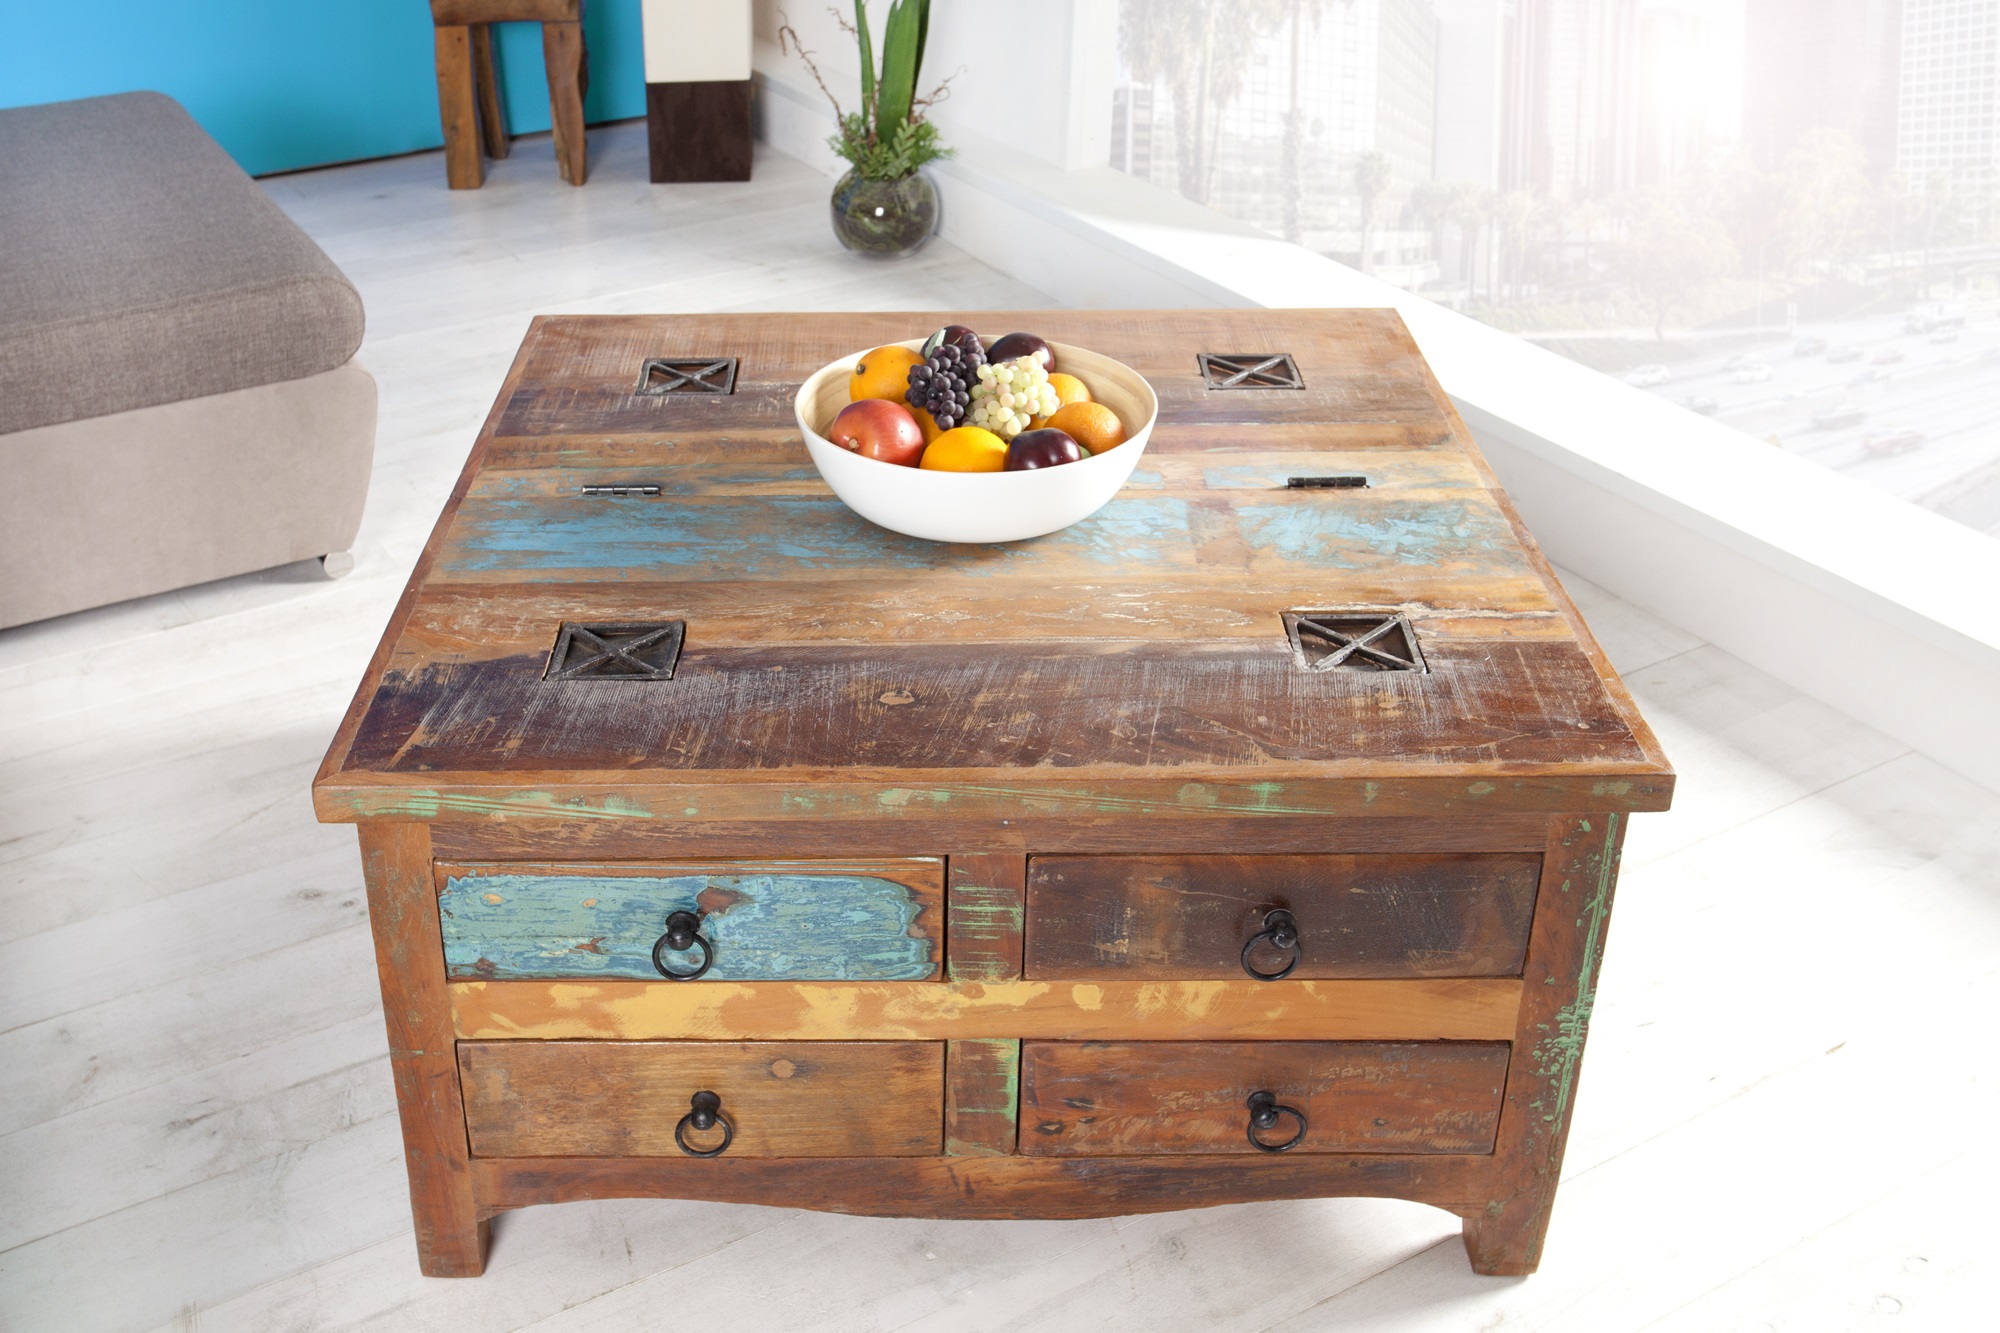 Consequent Vorming Wild salontafel recycled hout | MeubelDeals.nl